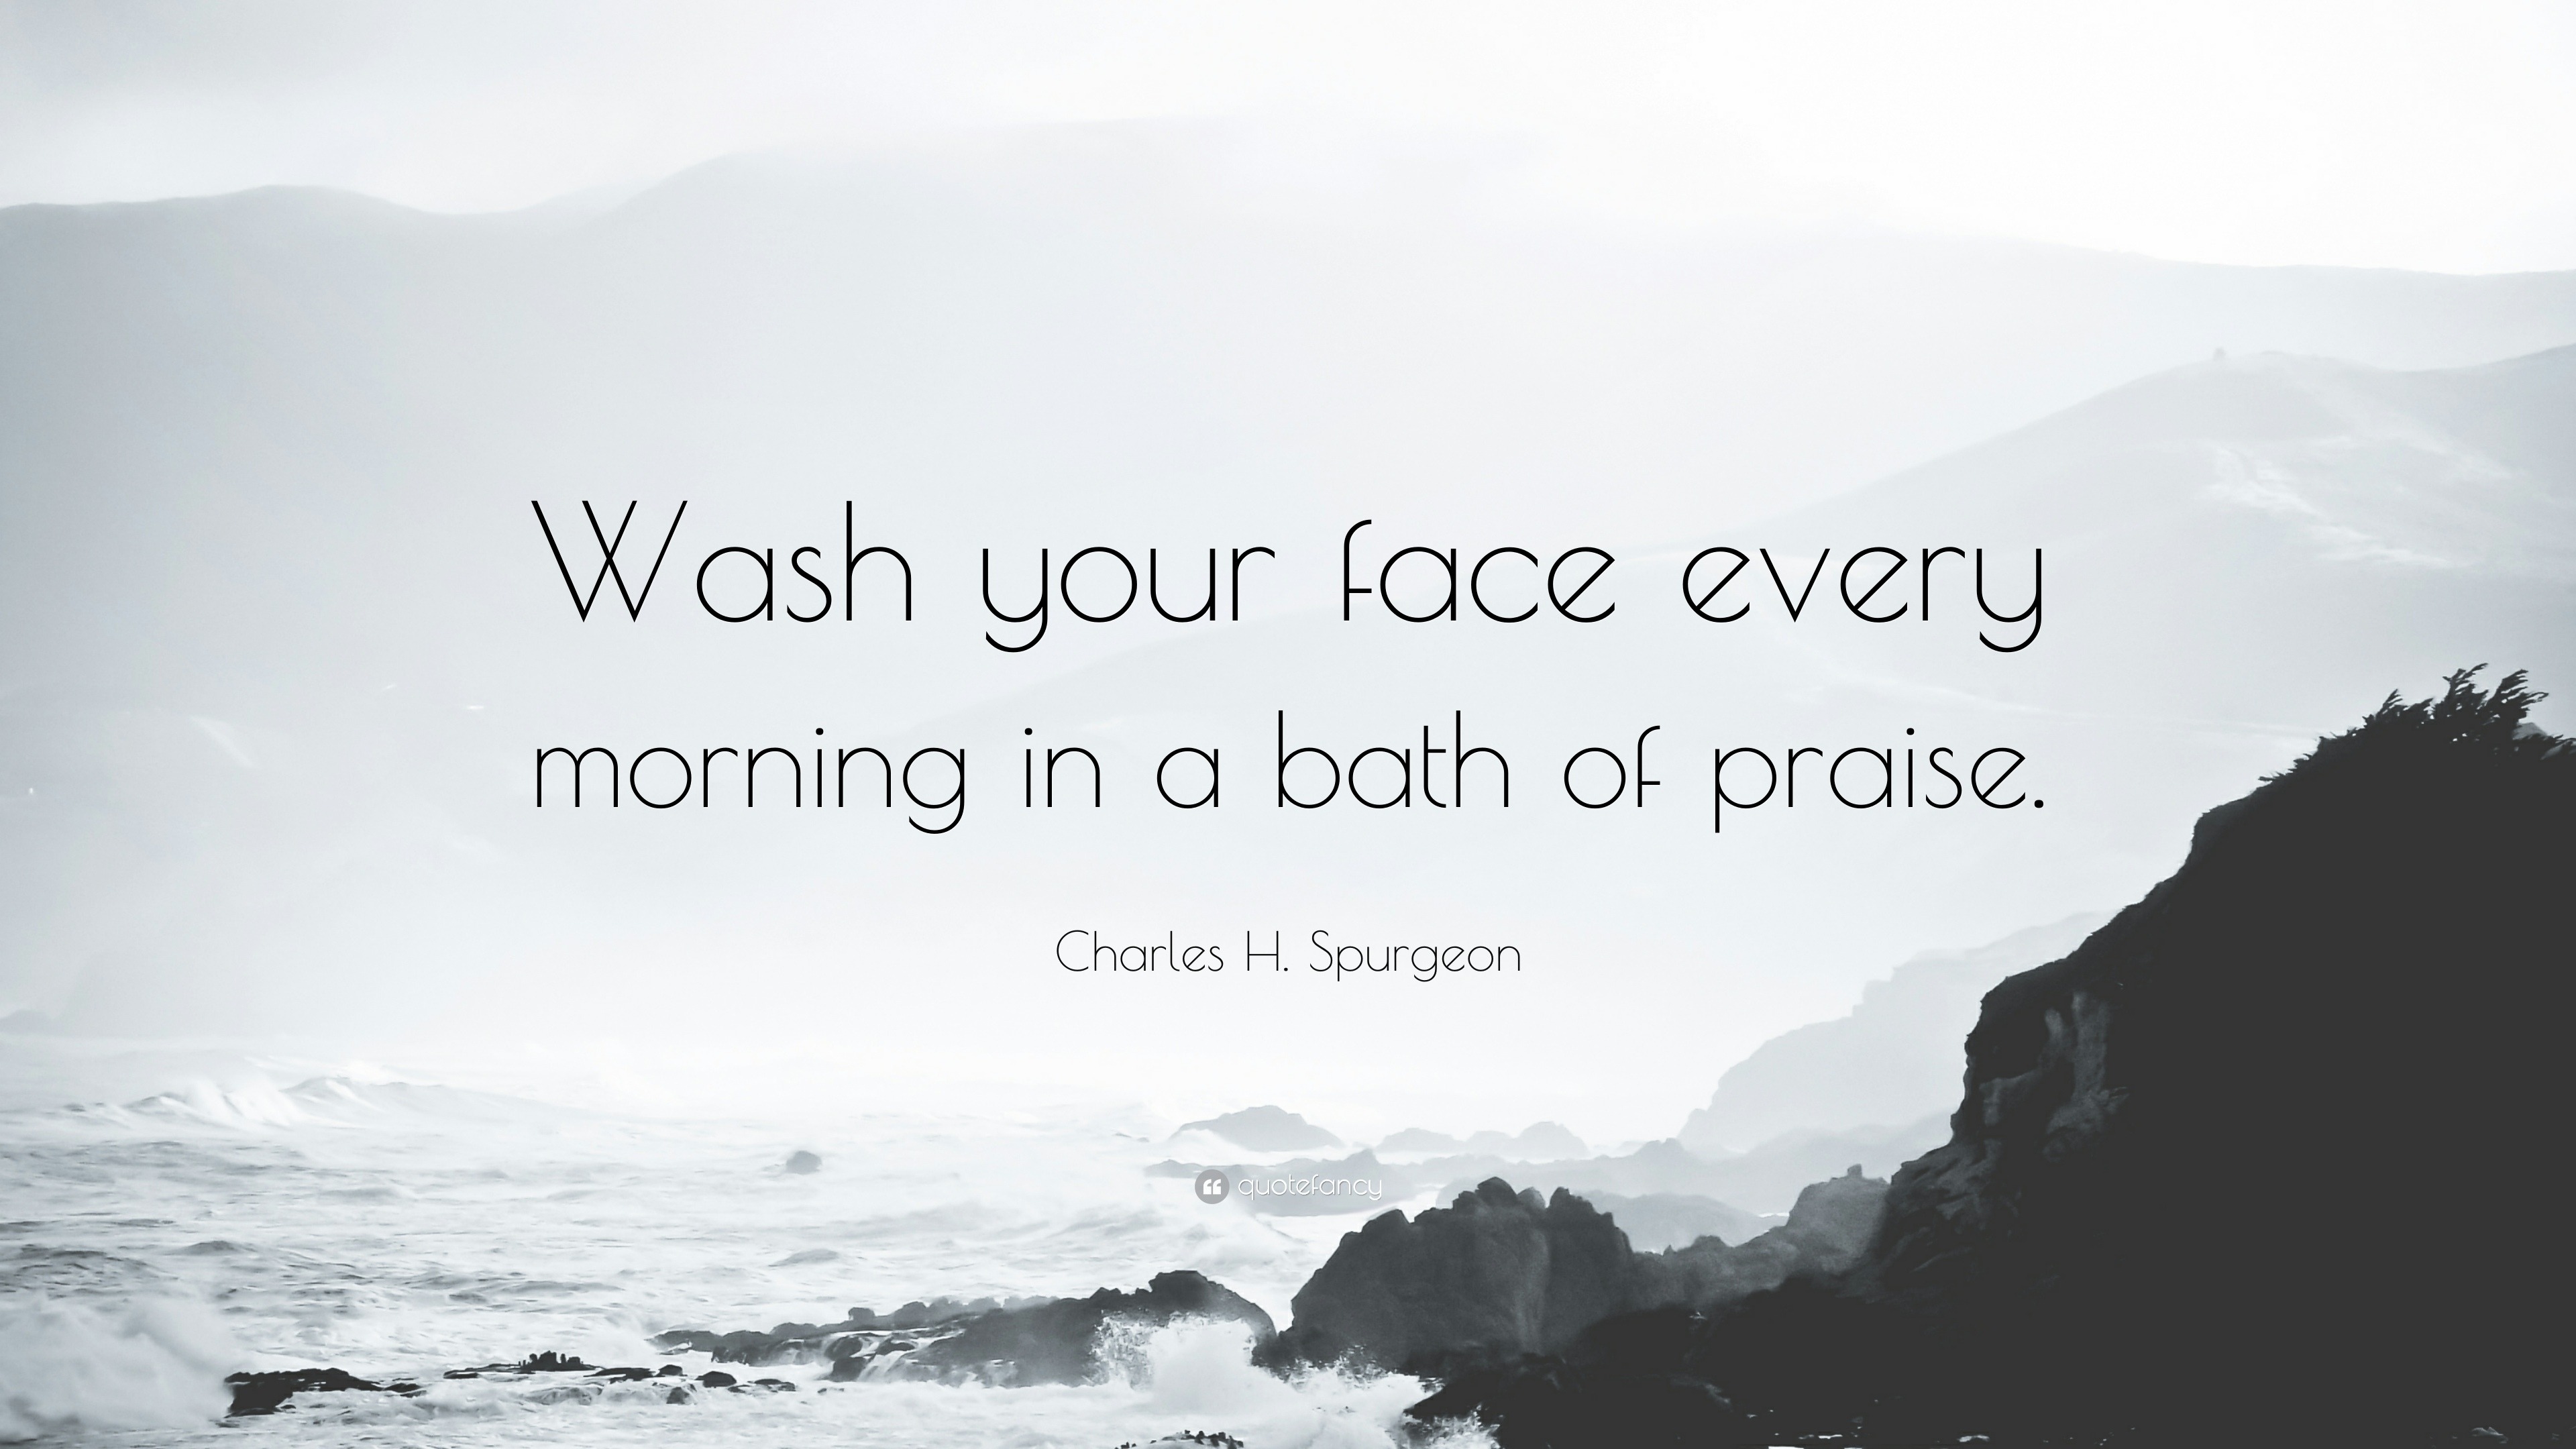 Image result for wash your face every morning charles spurgeon picture quote